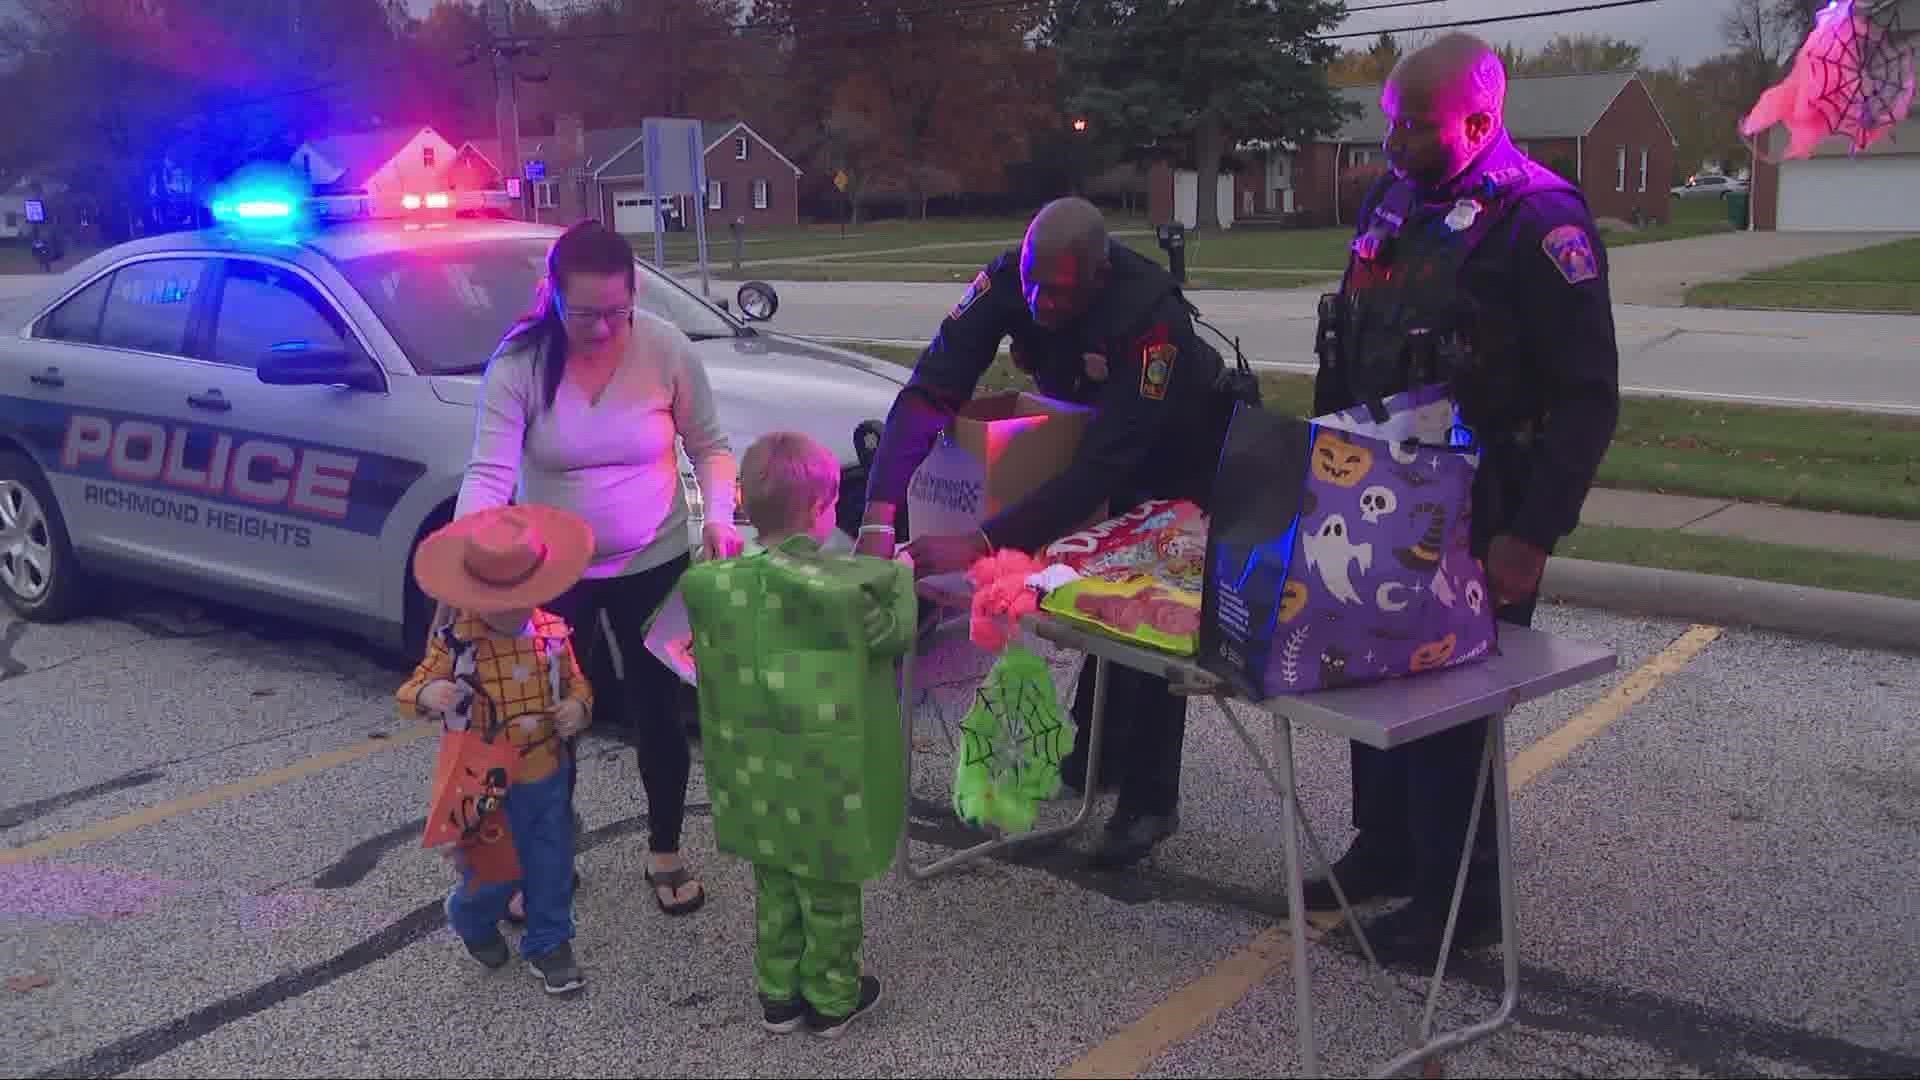 Monday marked Trick or Treat and the Richmond Heights Police were in the spirit. In a tradition that began four years ago, officers passed out candy to kids.